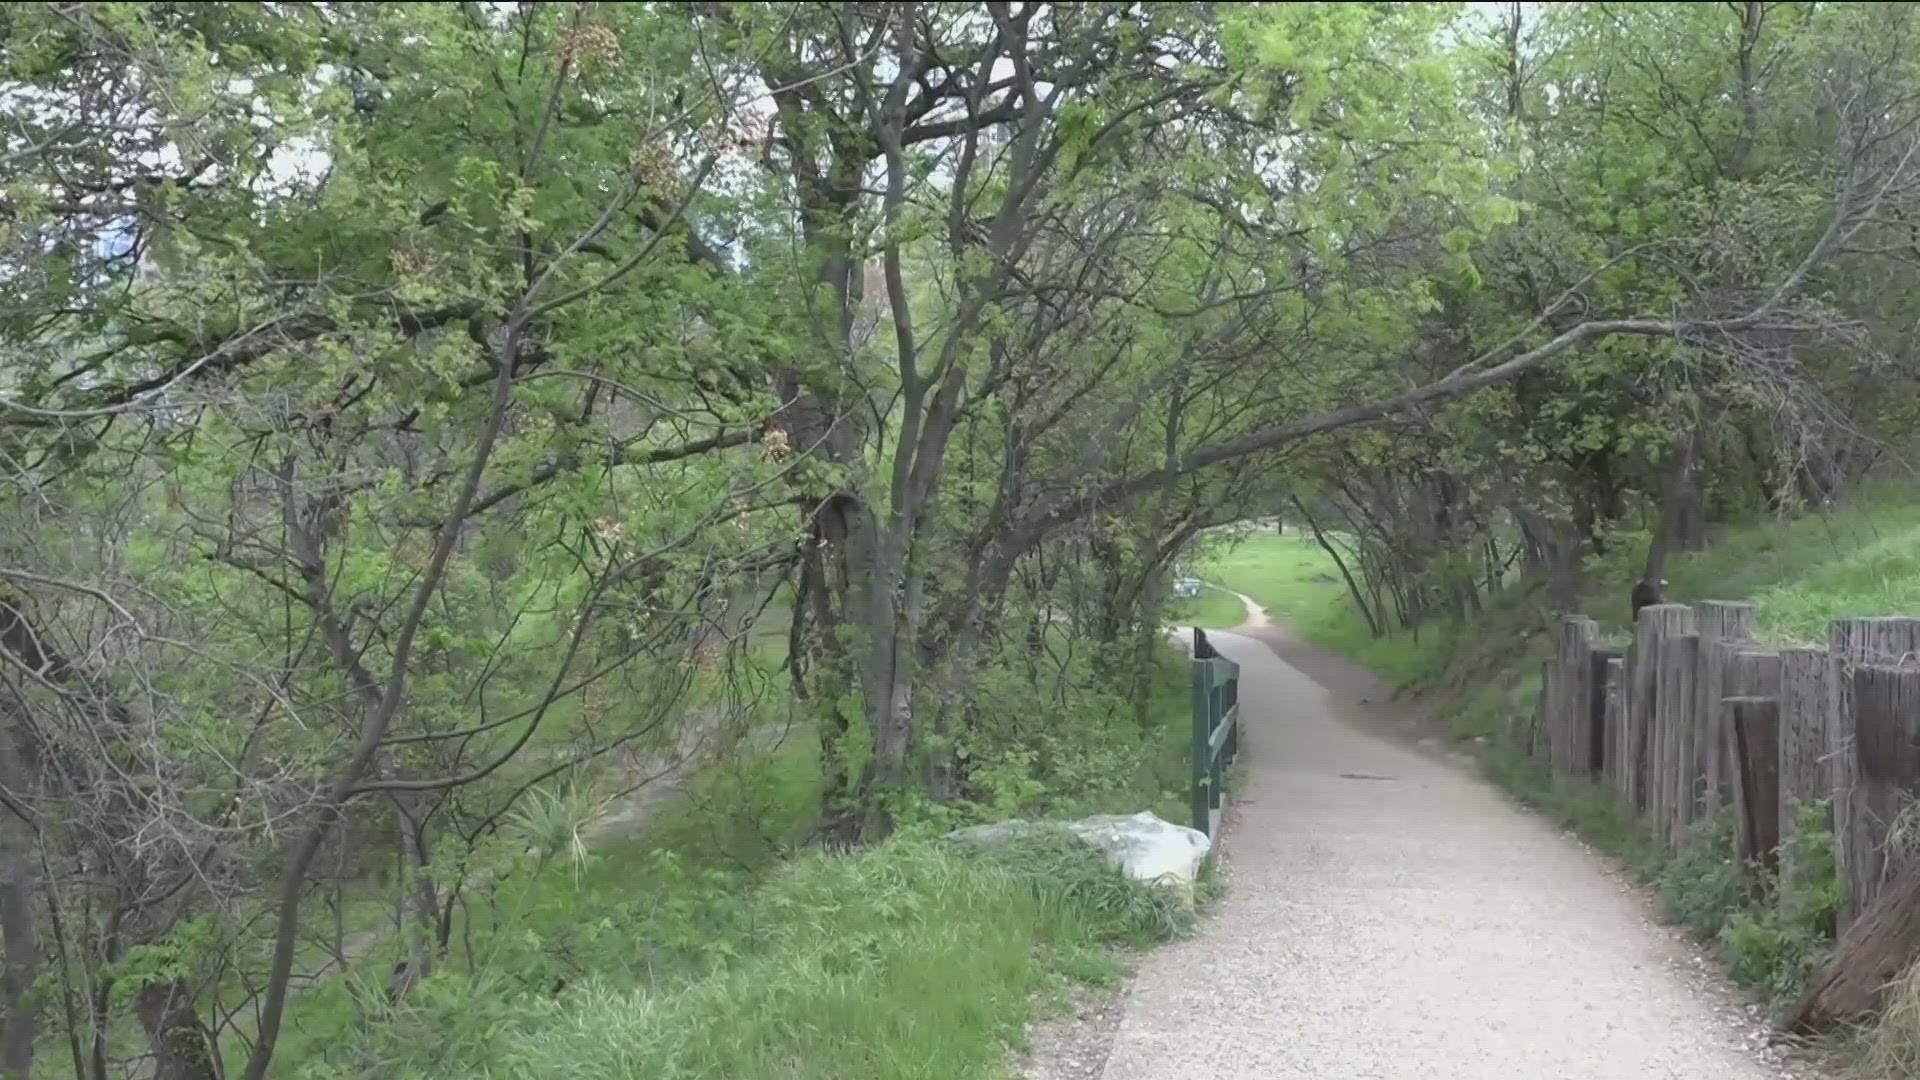 Construction will soon get underway on Interstate 35. But in order for that to happen, TxDOT will have to close a park that is home to a popular Austin walking trail